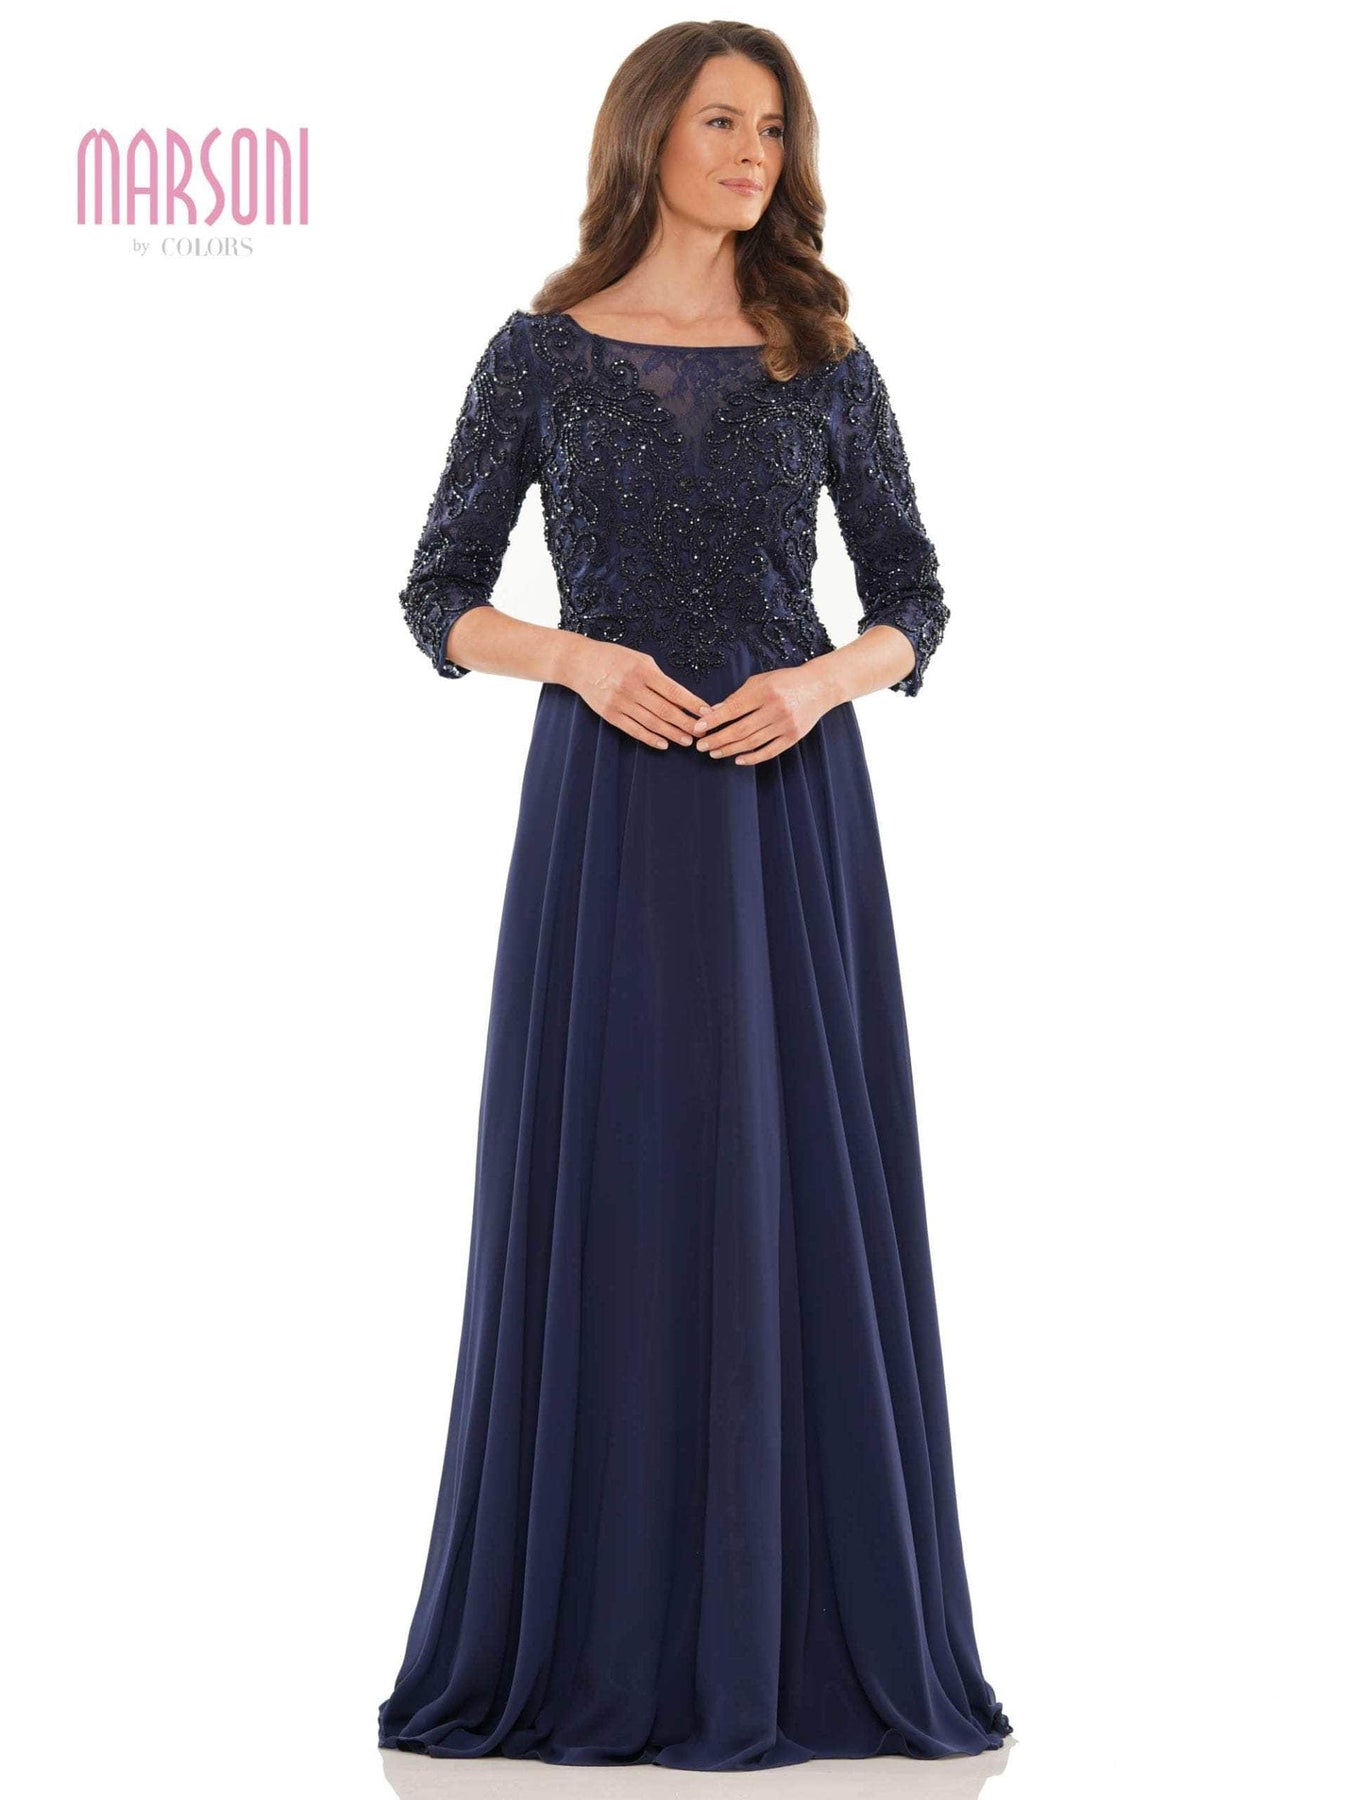 Marsoni by Colors - MV1052 Embroidered Bateau Chiffon A-line Gown Mother of the Bride Dresses 6 / Navy